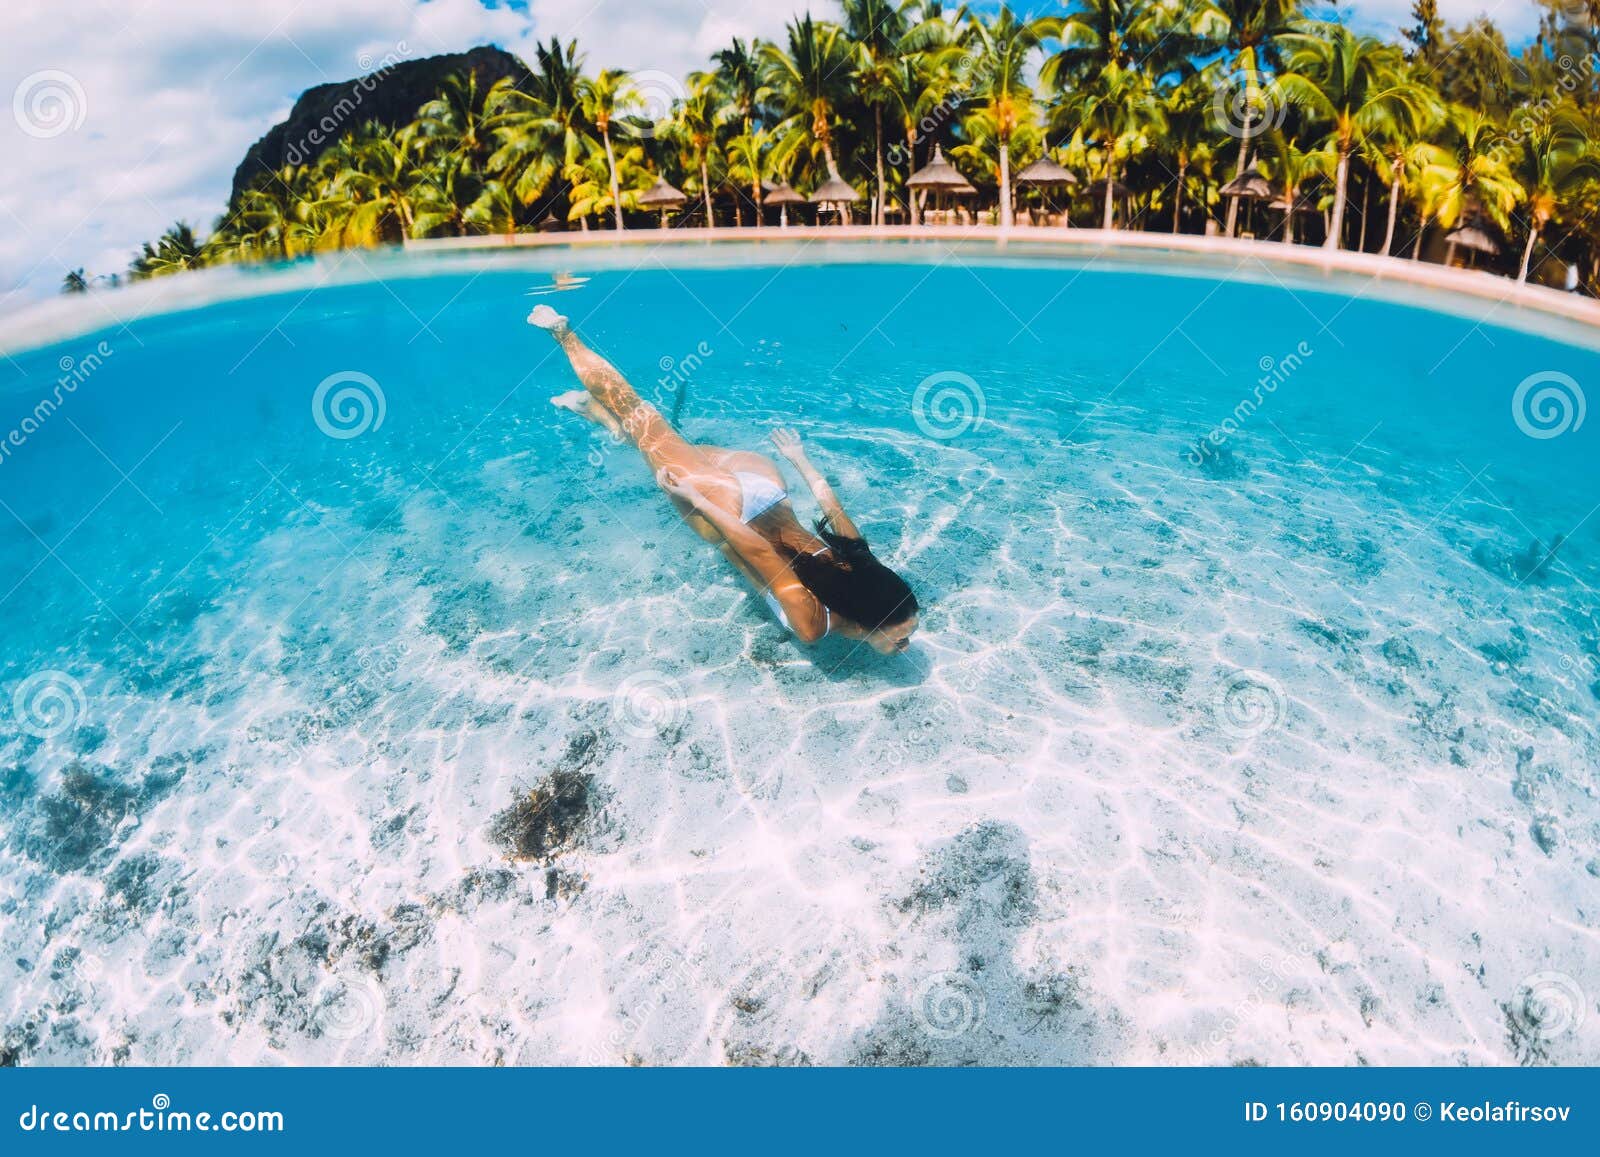 Aerial View Of Young Woman Swimming Underwater In The Pool 